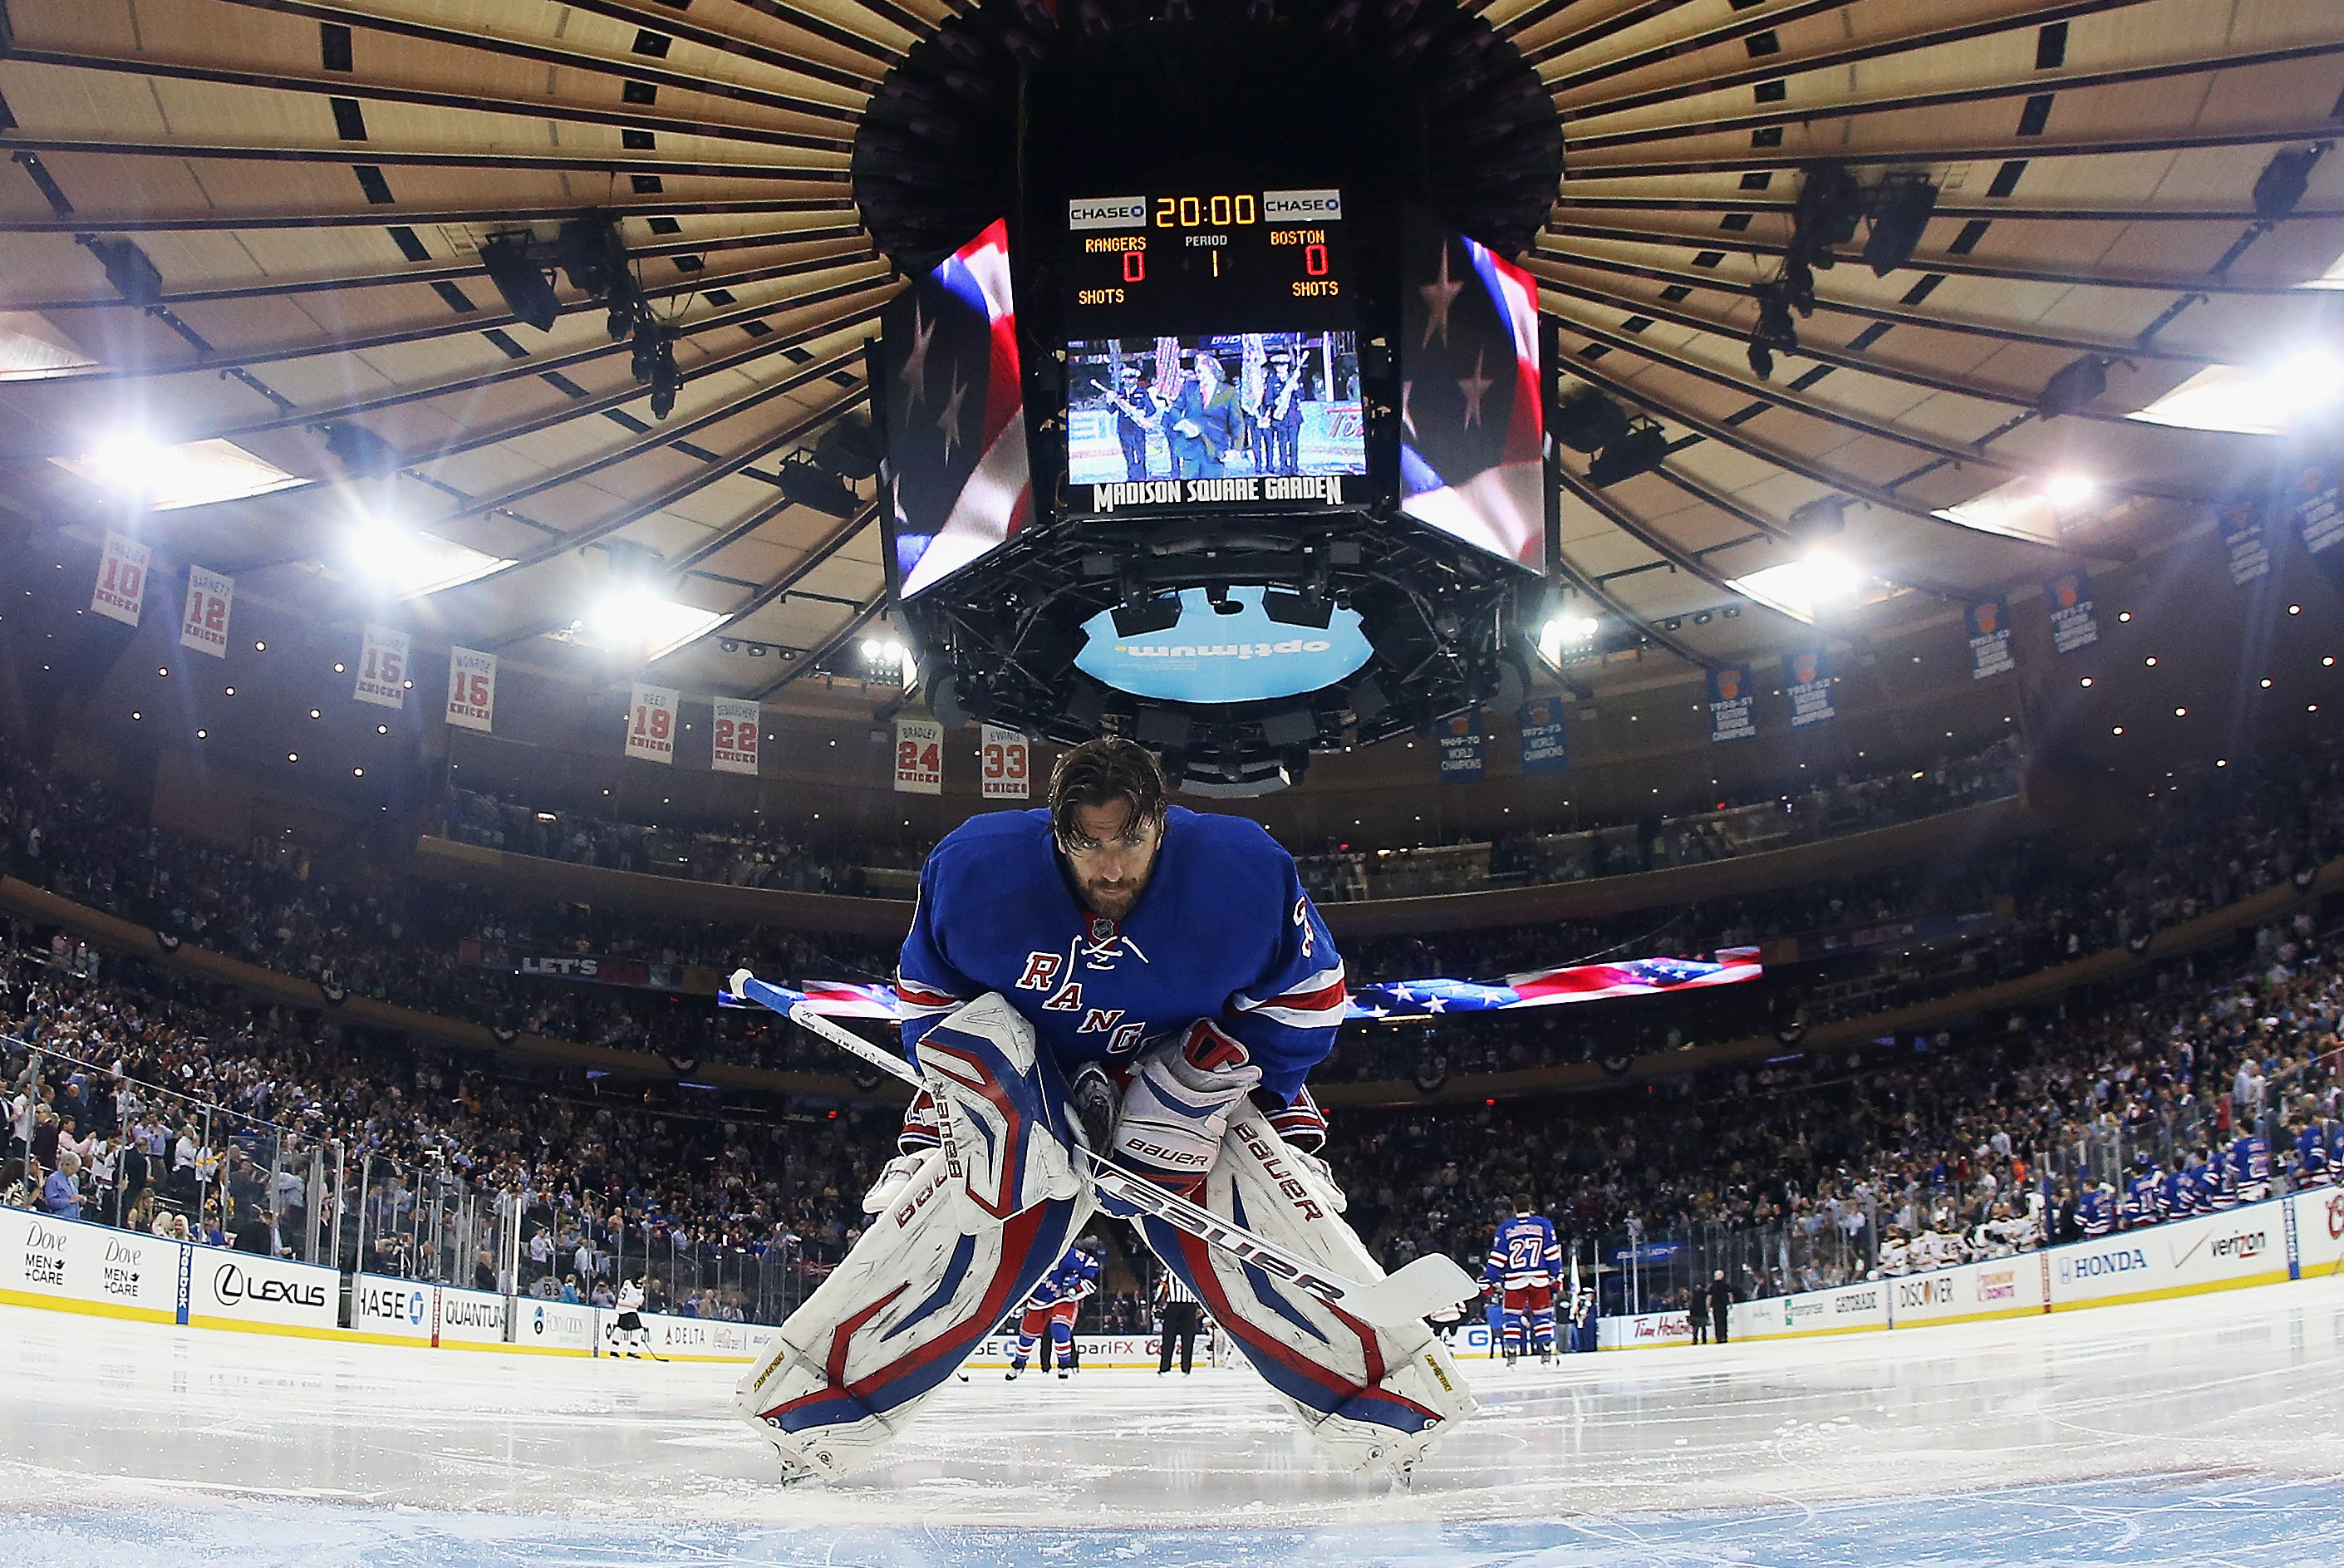 New York Rangers on X: It's #NYR game night @TheGarden! Be there